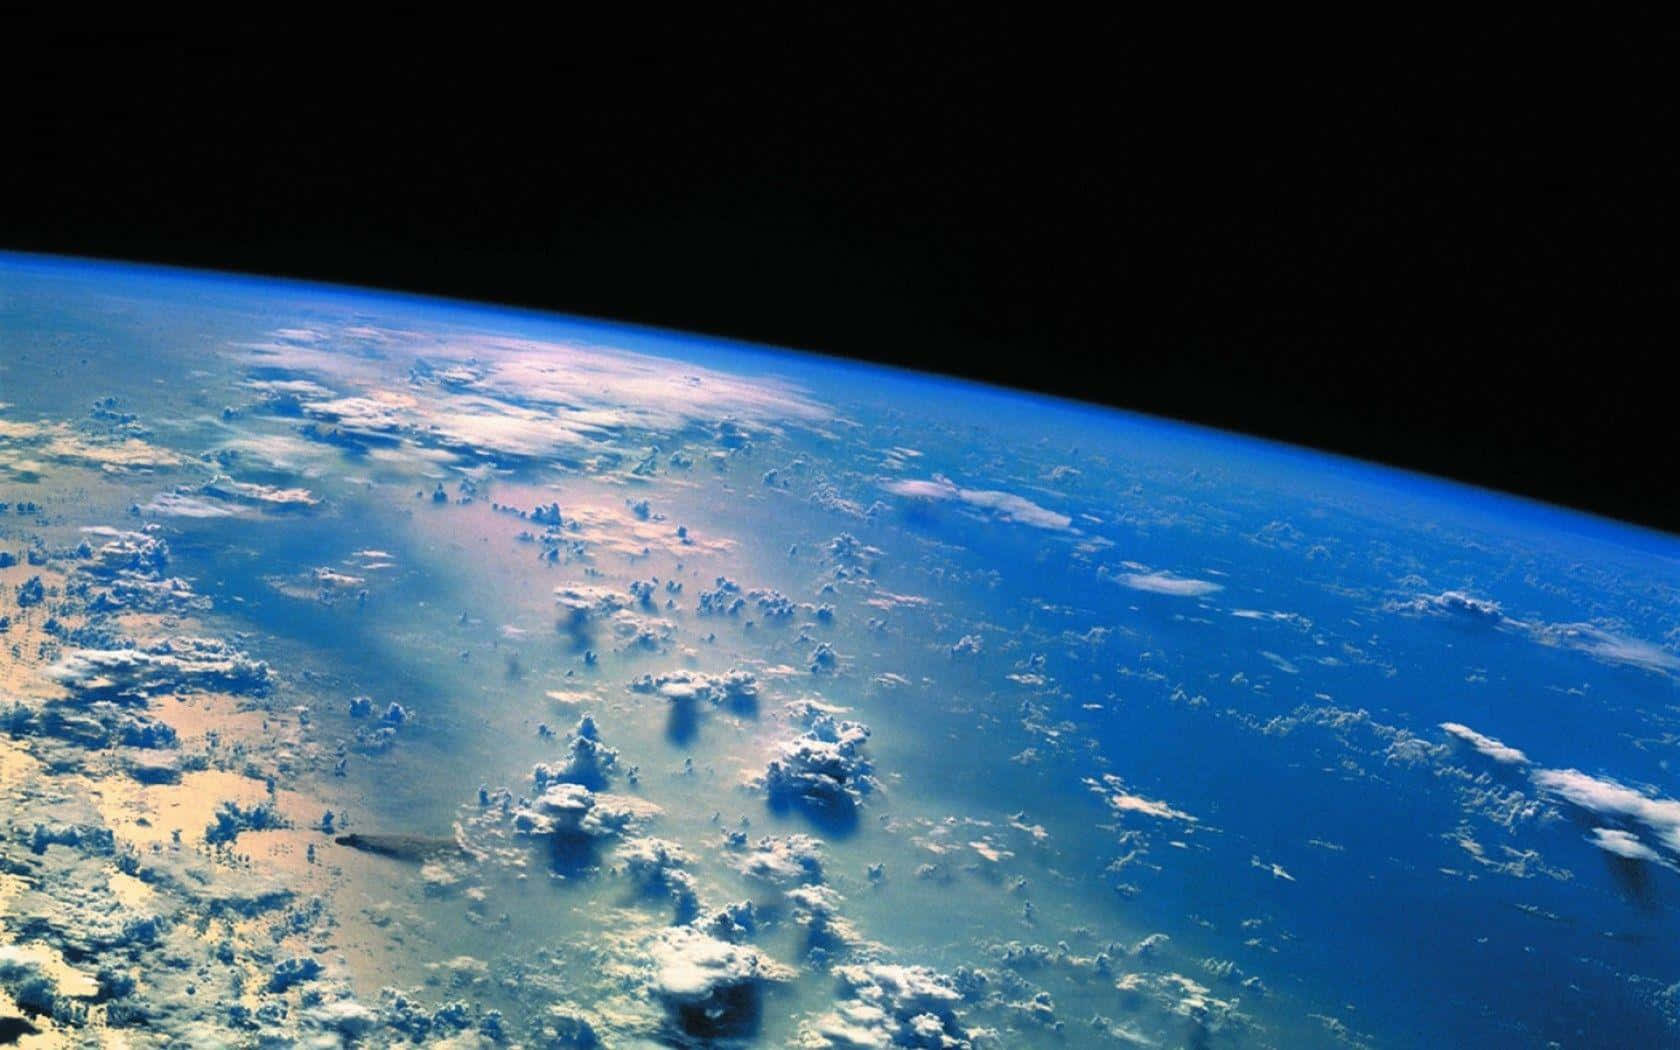 The planet earth viewed from outer space Wallpaper